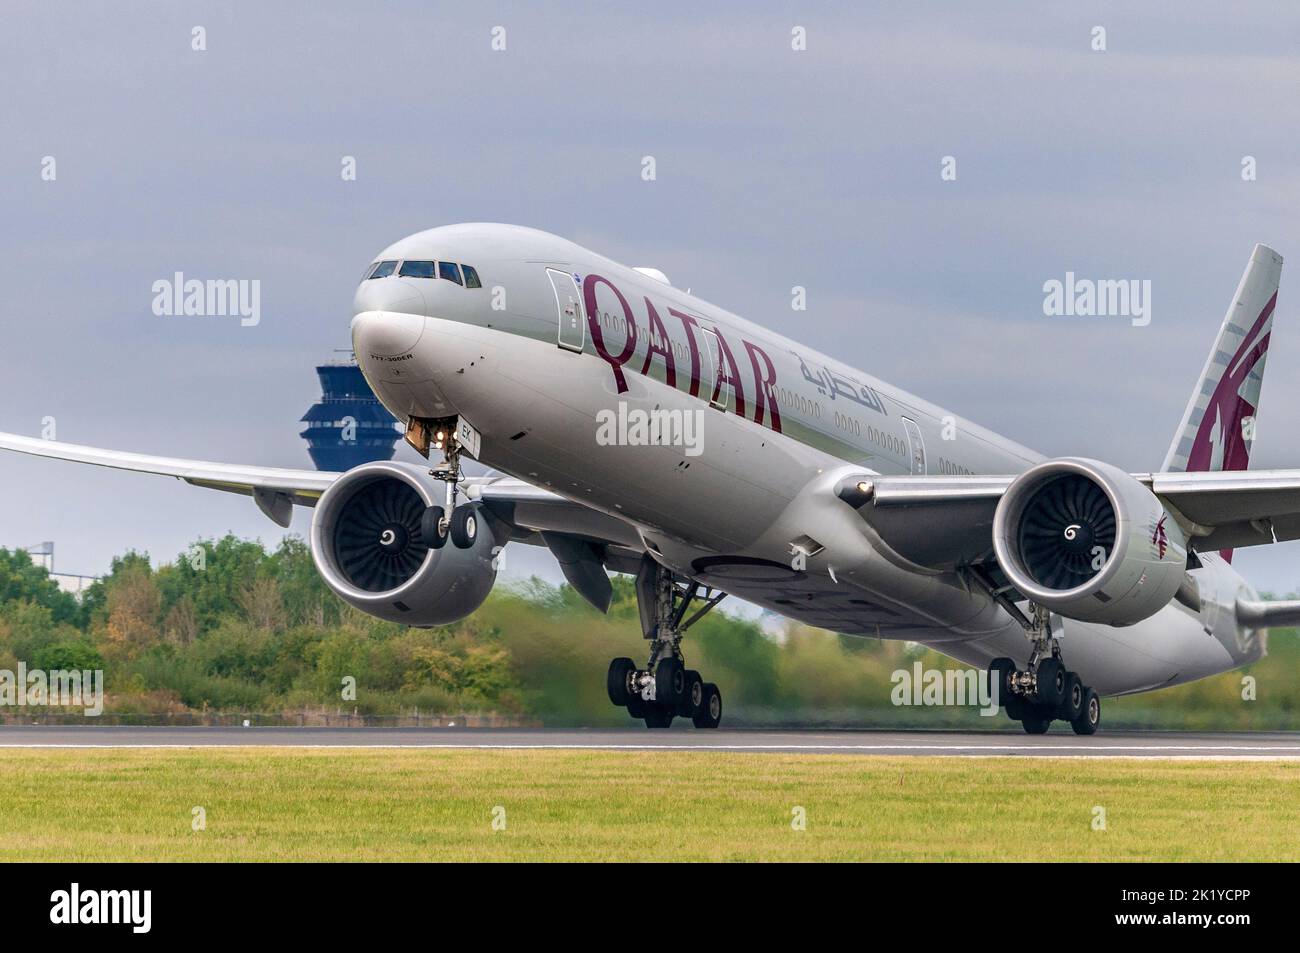 Qatar Airways Boeing 777-300/ER registration A7-BEK takes off at Manchester airport. Stock Photo